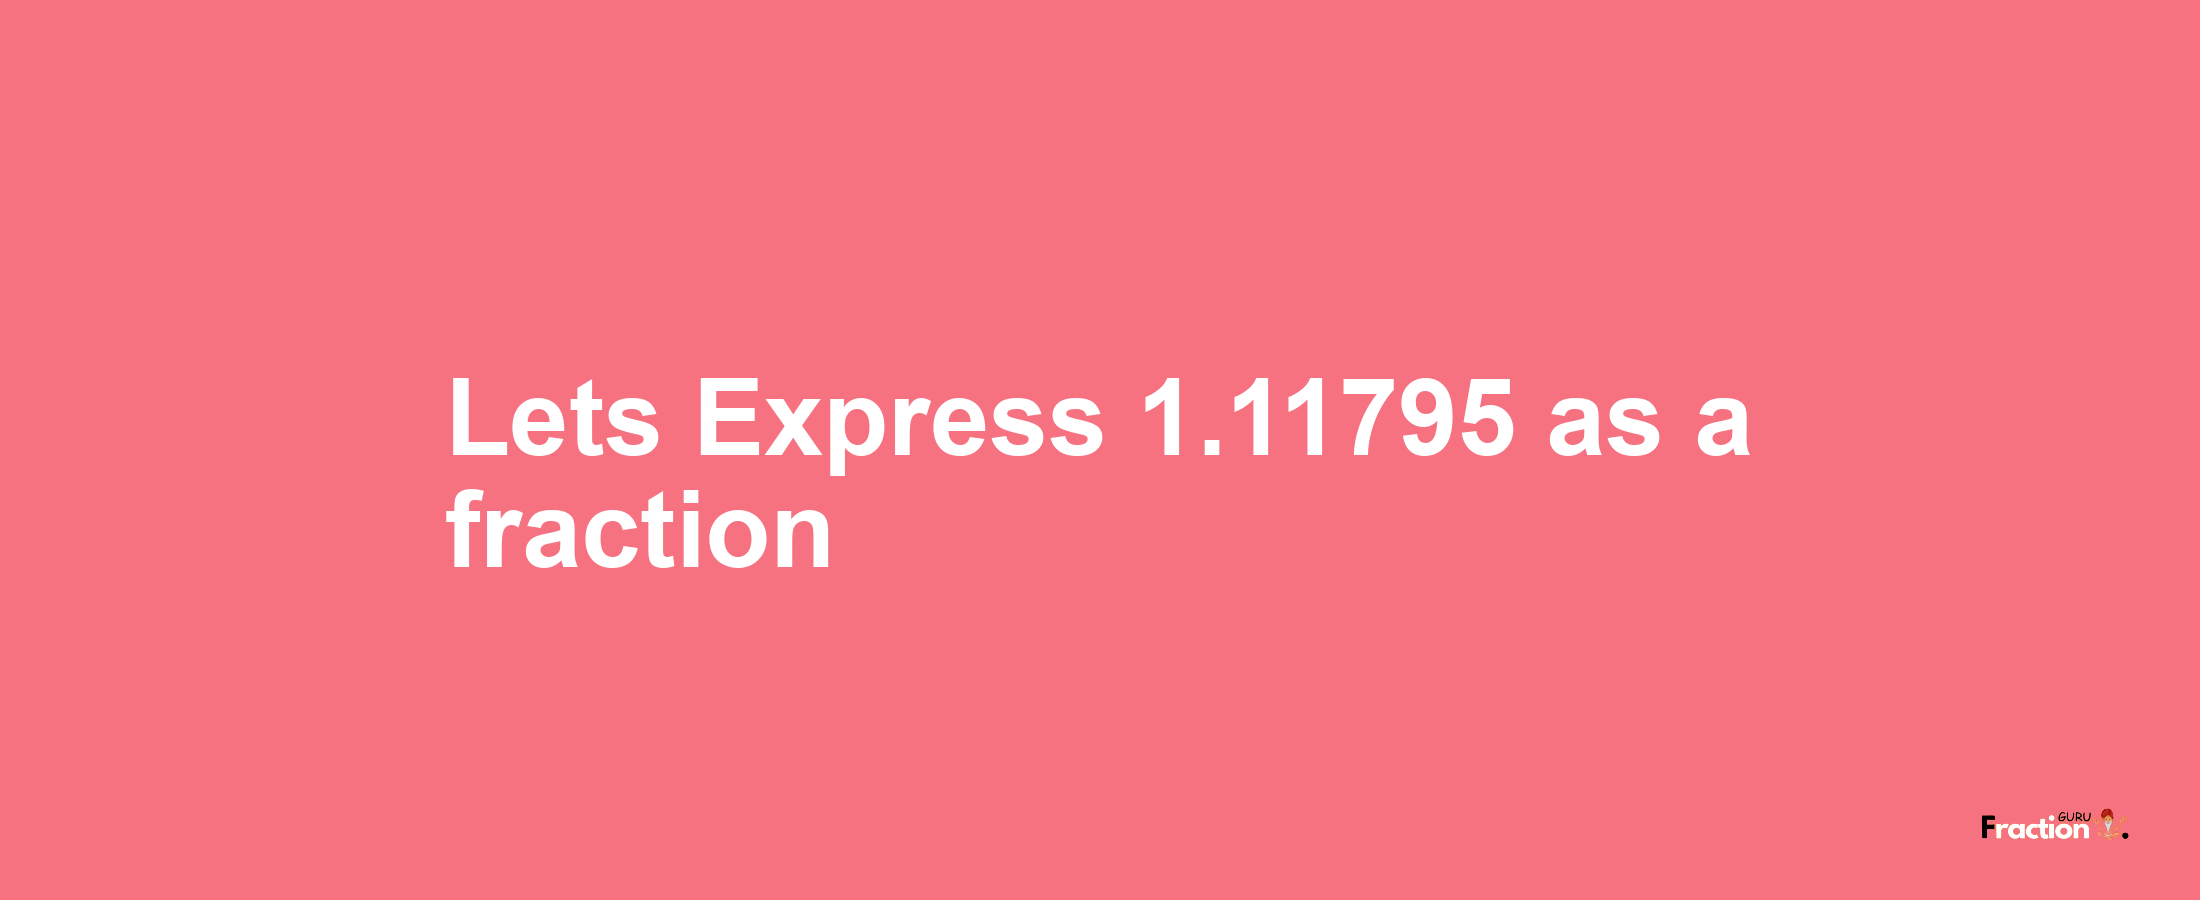 Lets Express 1.11795 as afraction